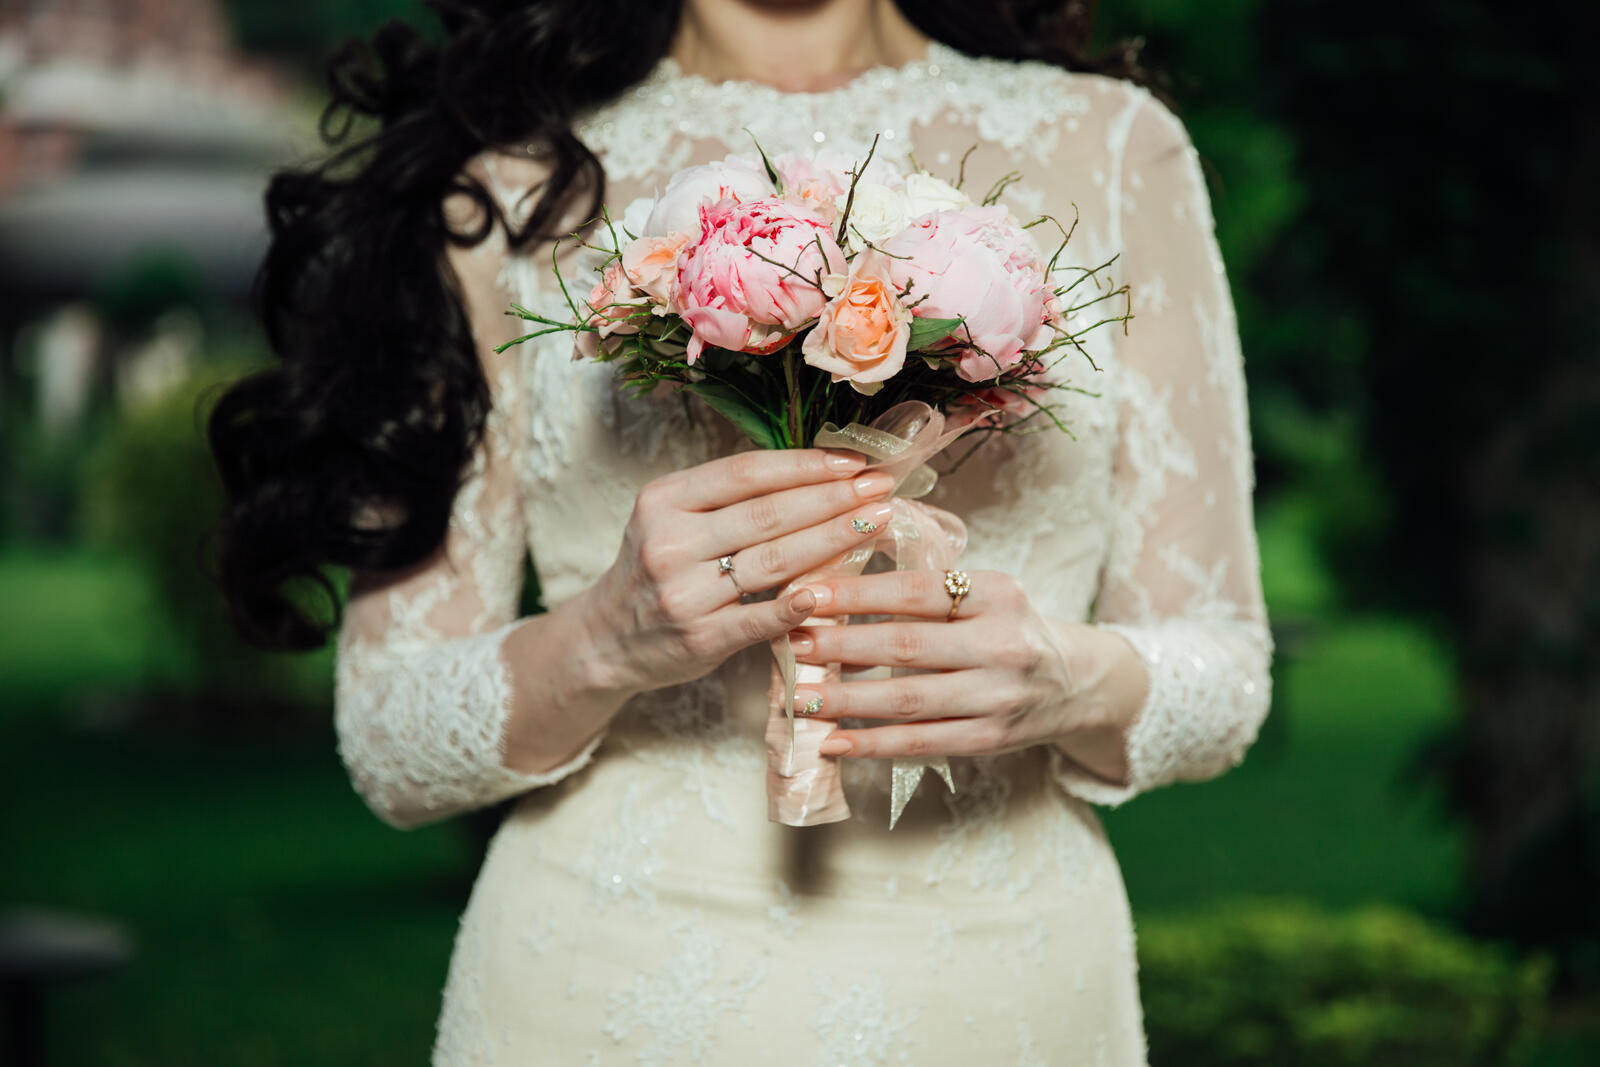 Free photo Bride at the wedding ceremony with a bouquet of flowers